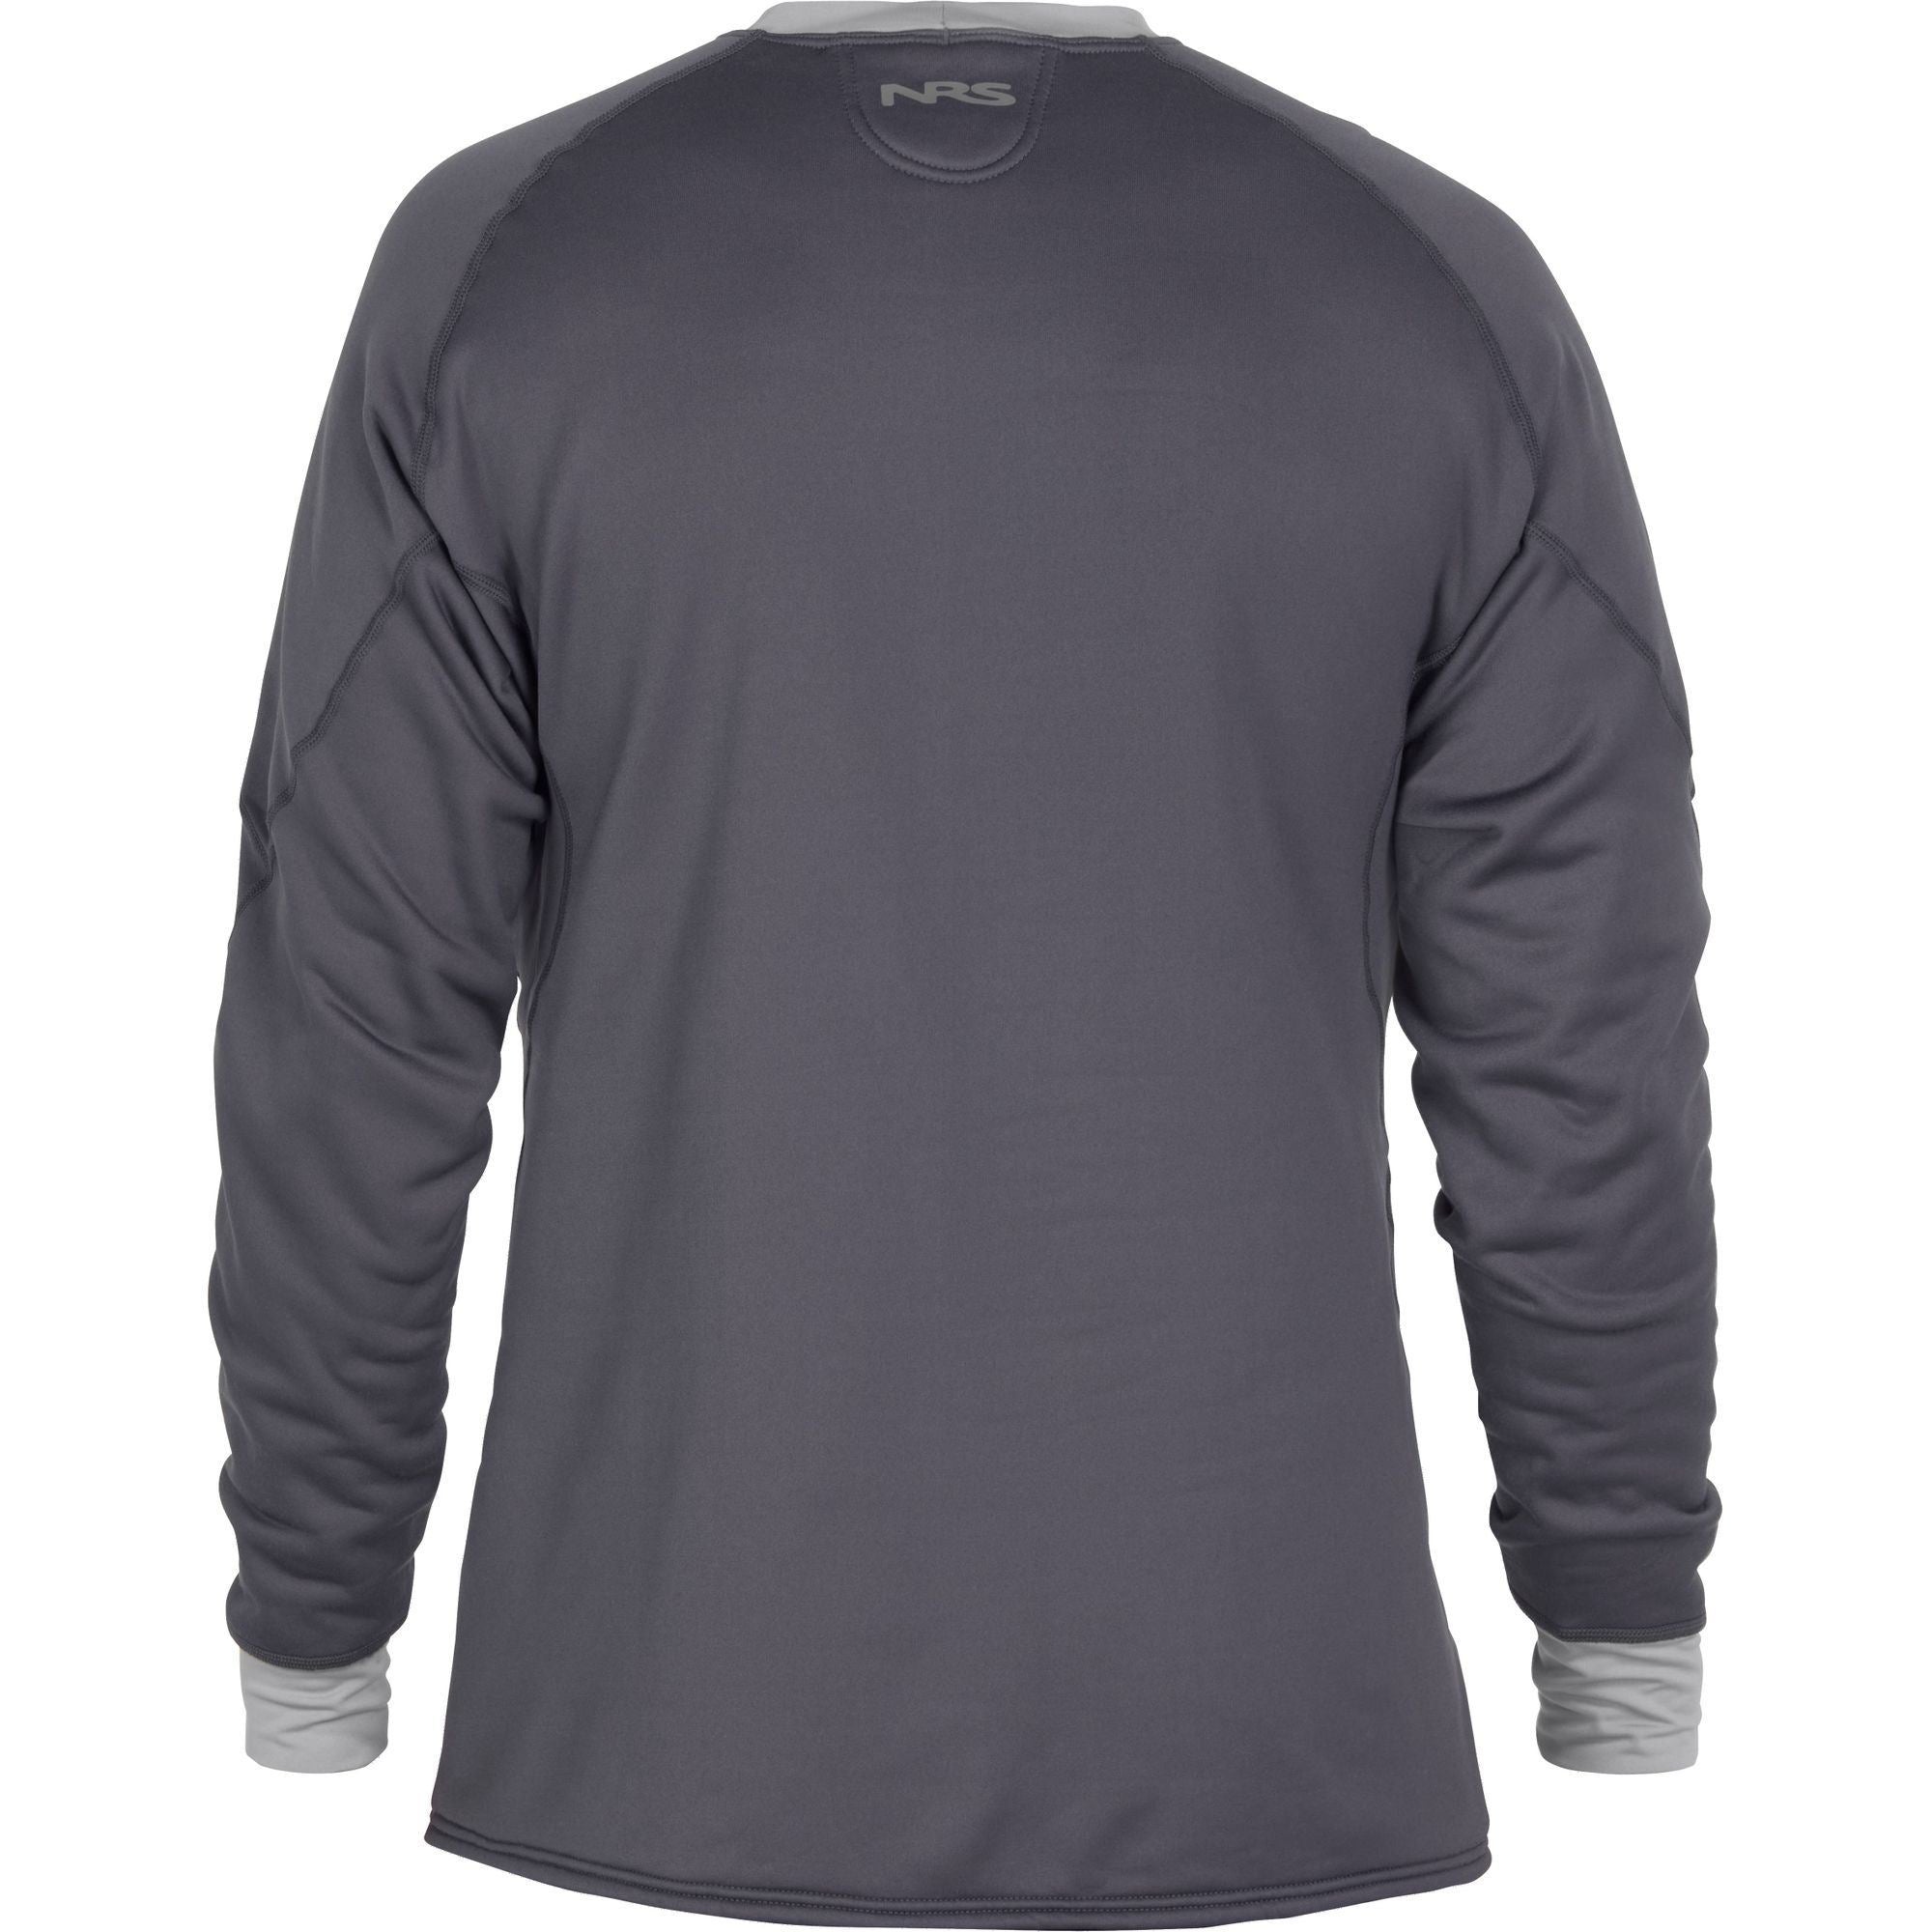 NRS Expedition Weight Union Shirt, Men's